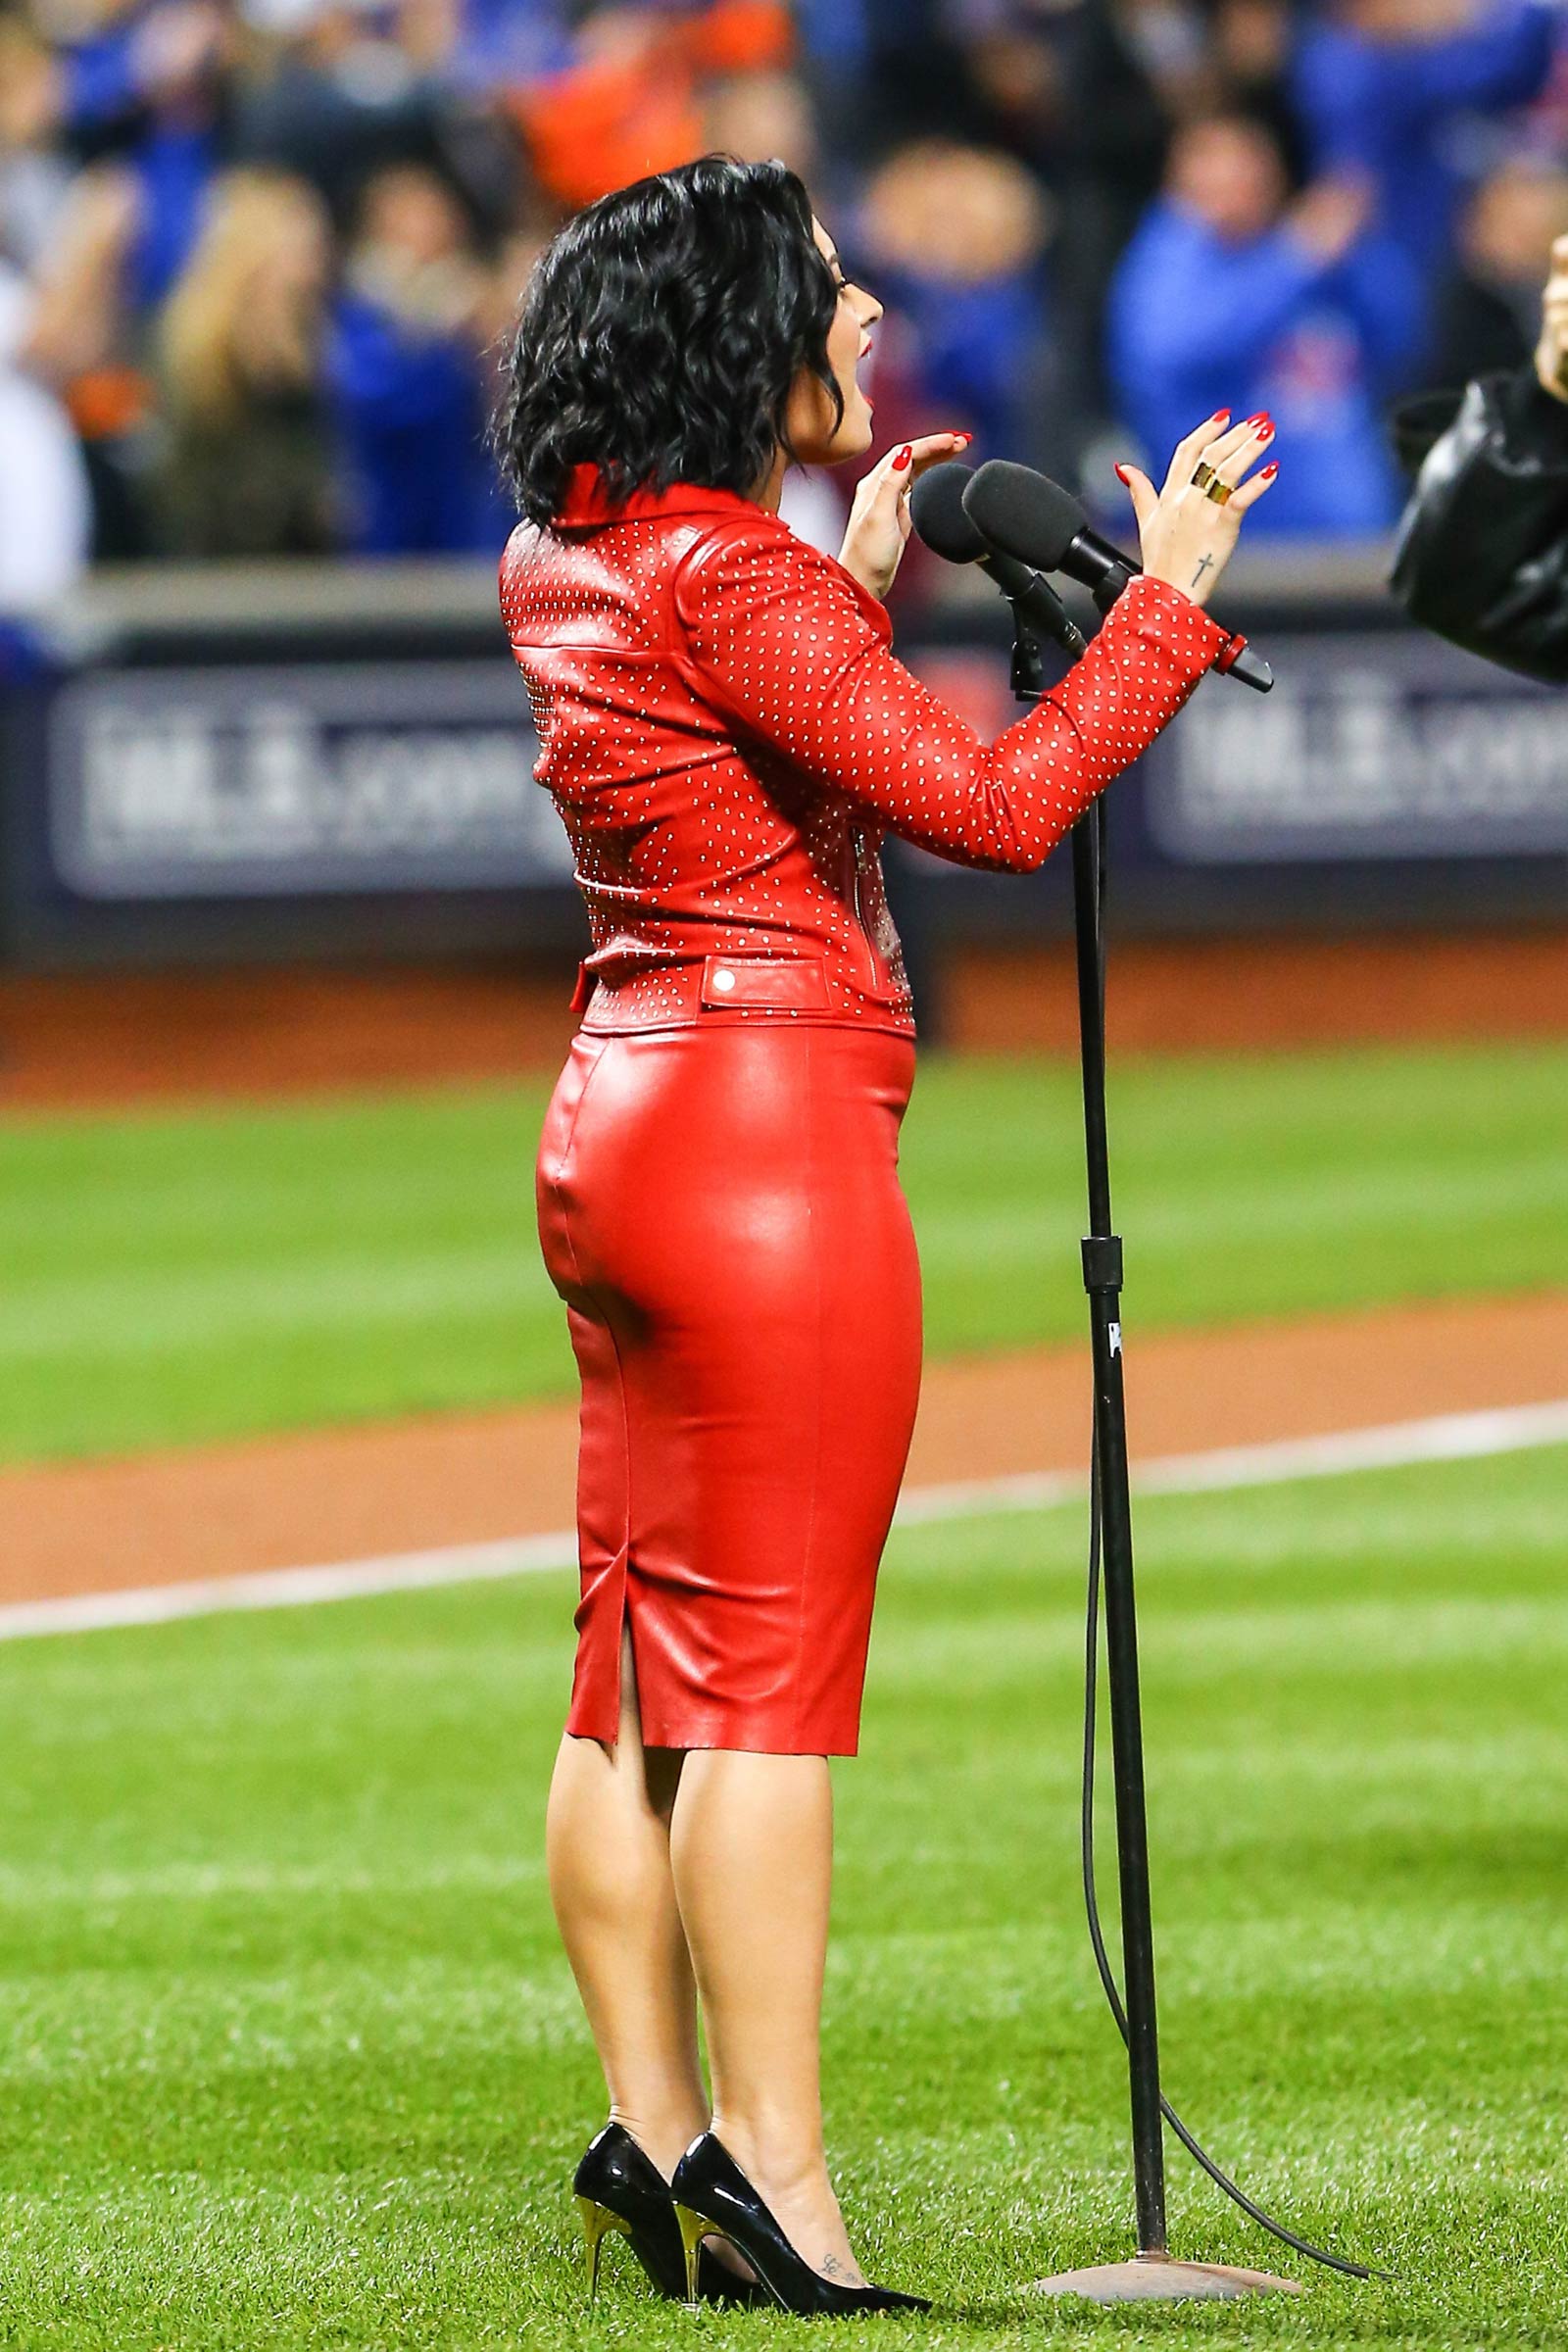 Demi Lovato performing at the World Series